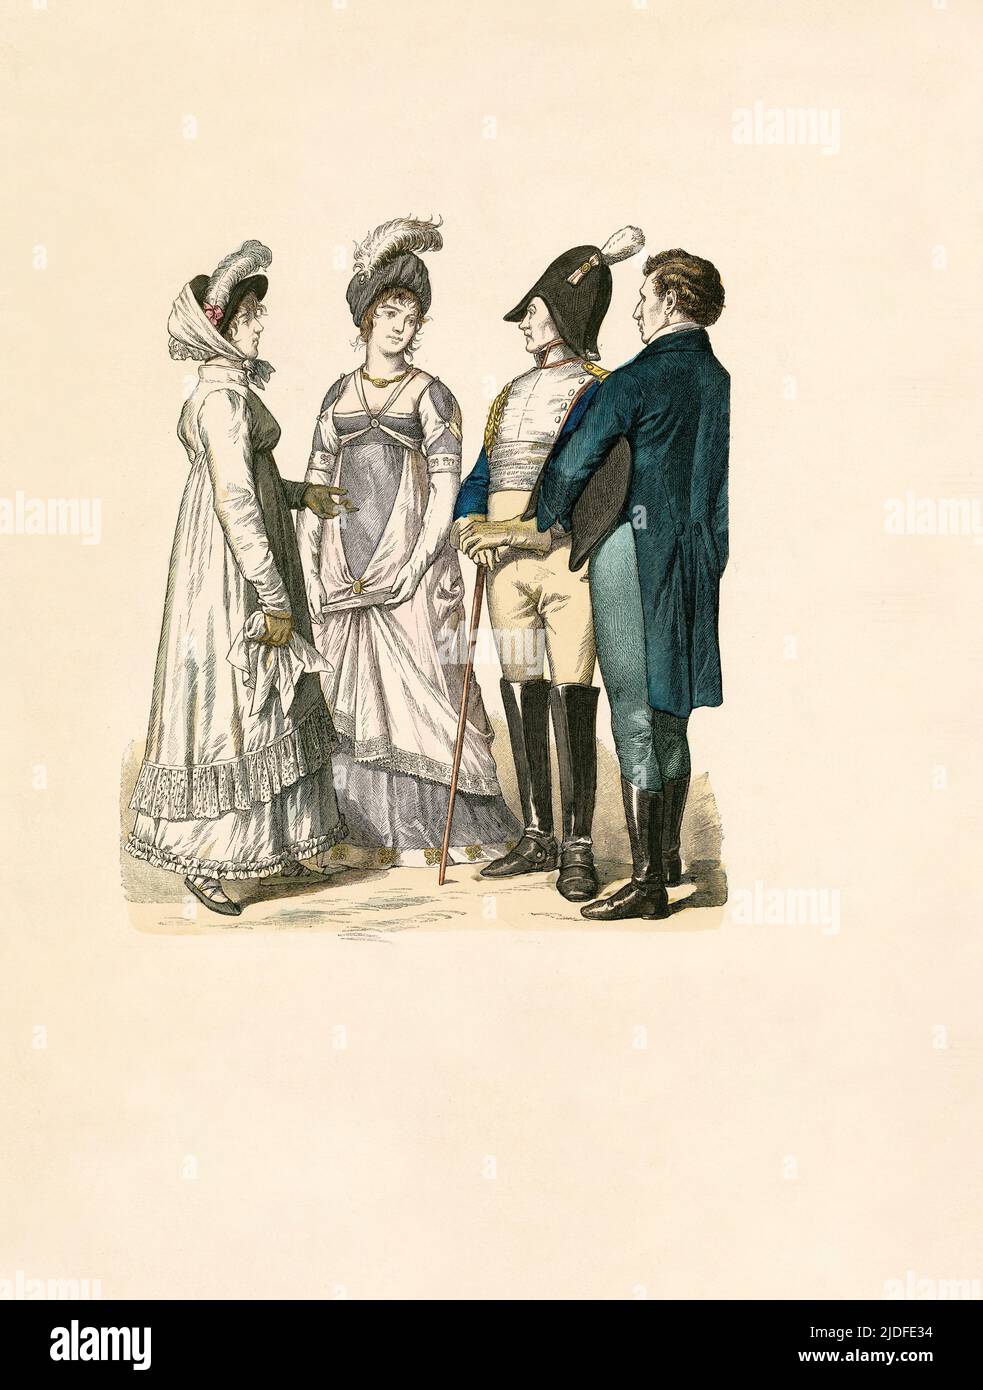 Empire Style, Germany and France, 1809-1812, Illustration, The History of Costume, Braun & Schneider, Munich, Germany, 1861-1880 Stock Photo